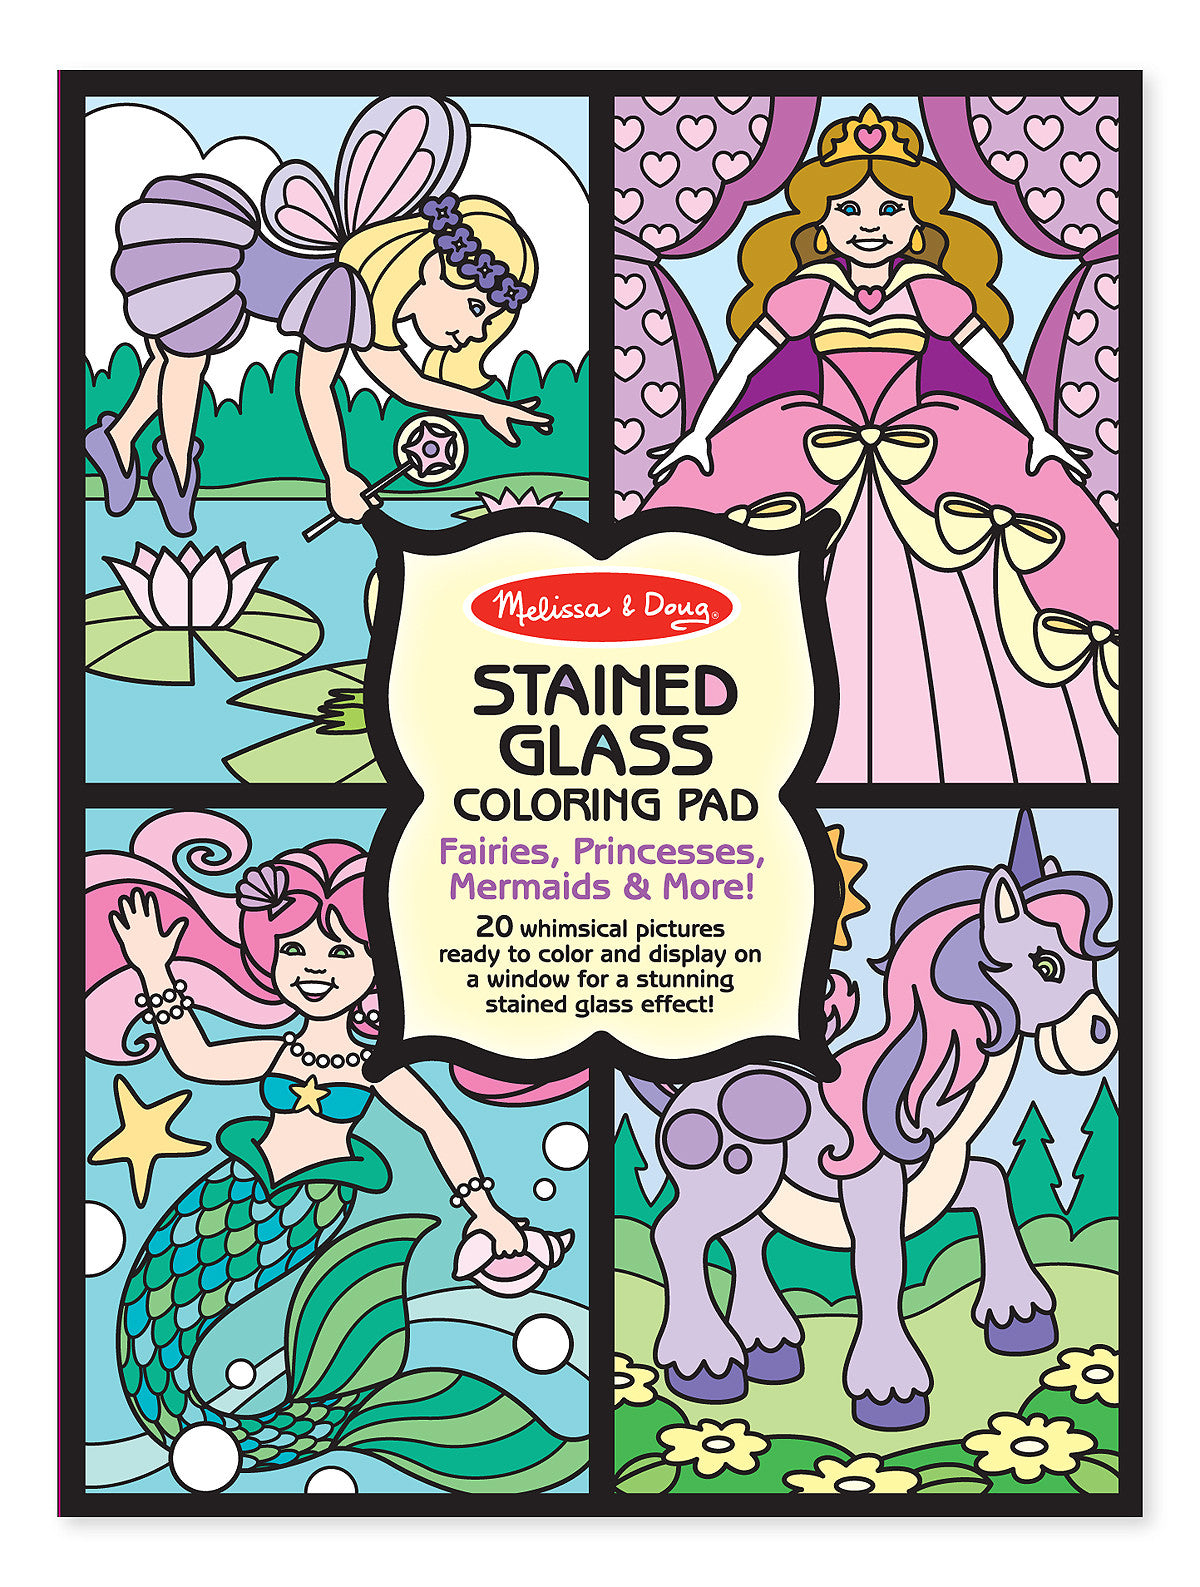 Melissa & Doug Stained Glass Coloring Pad - Fairies